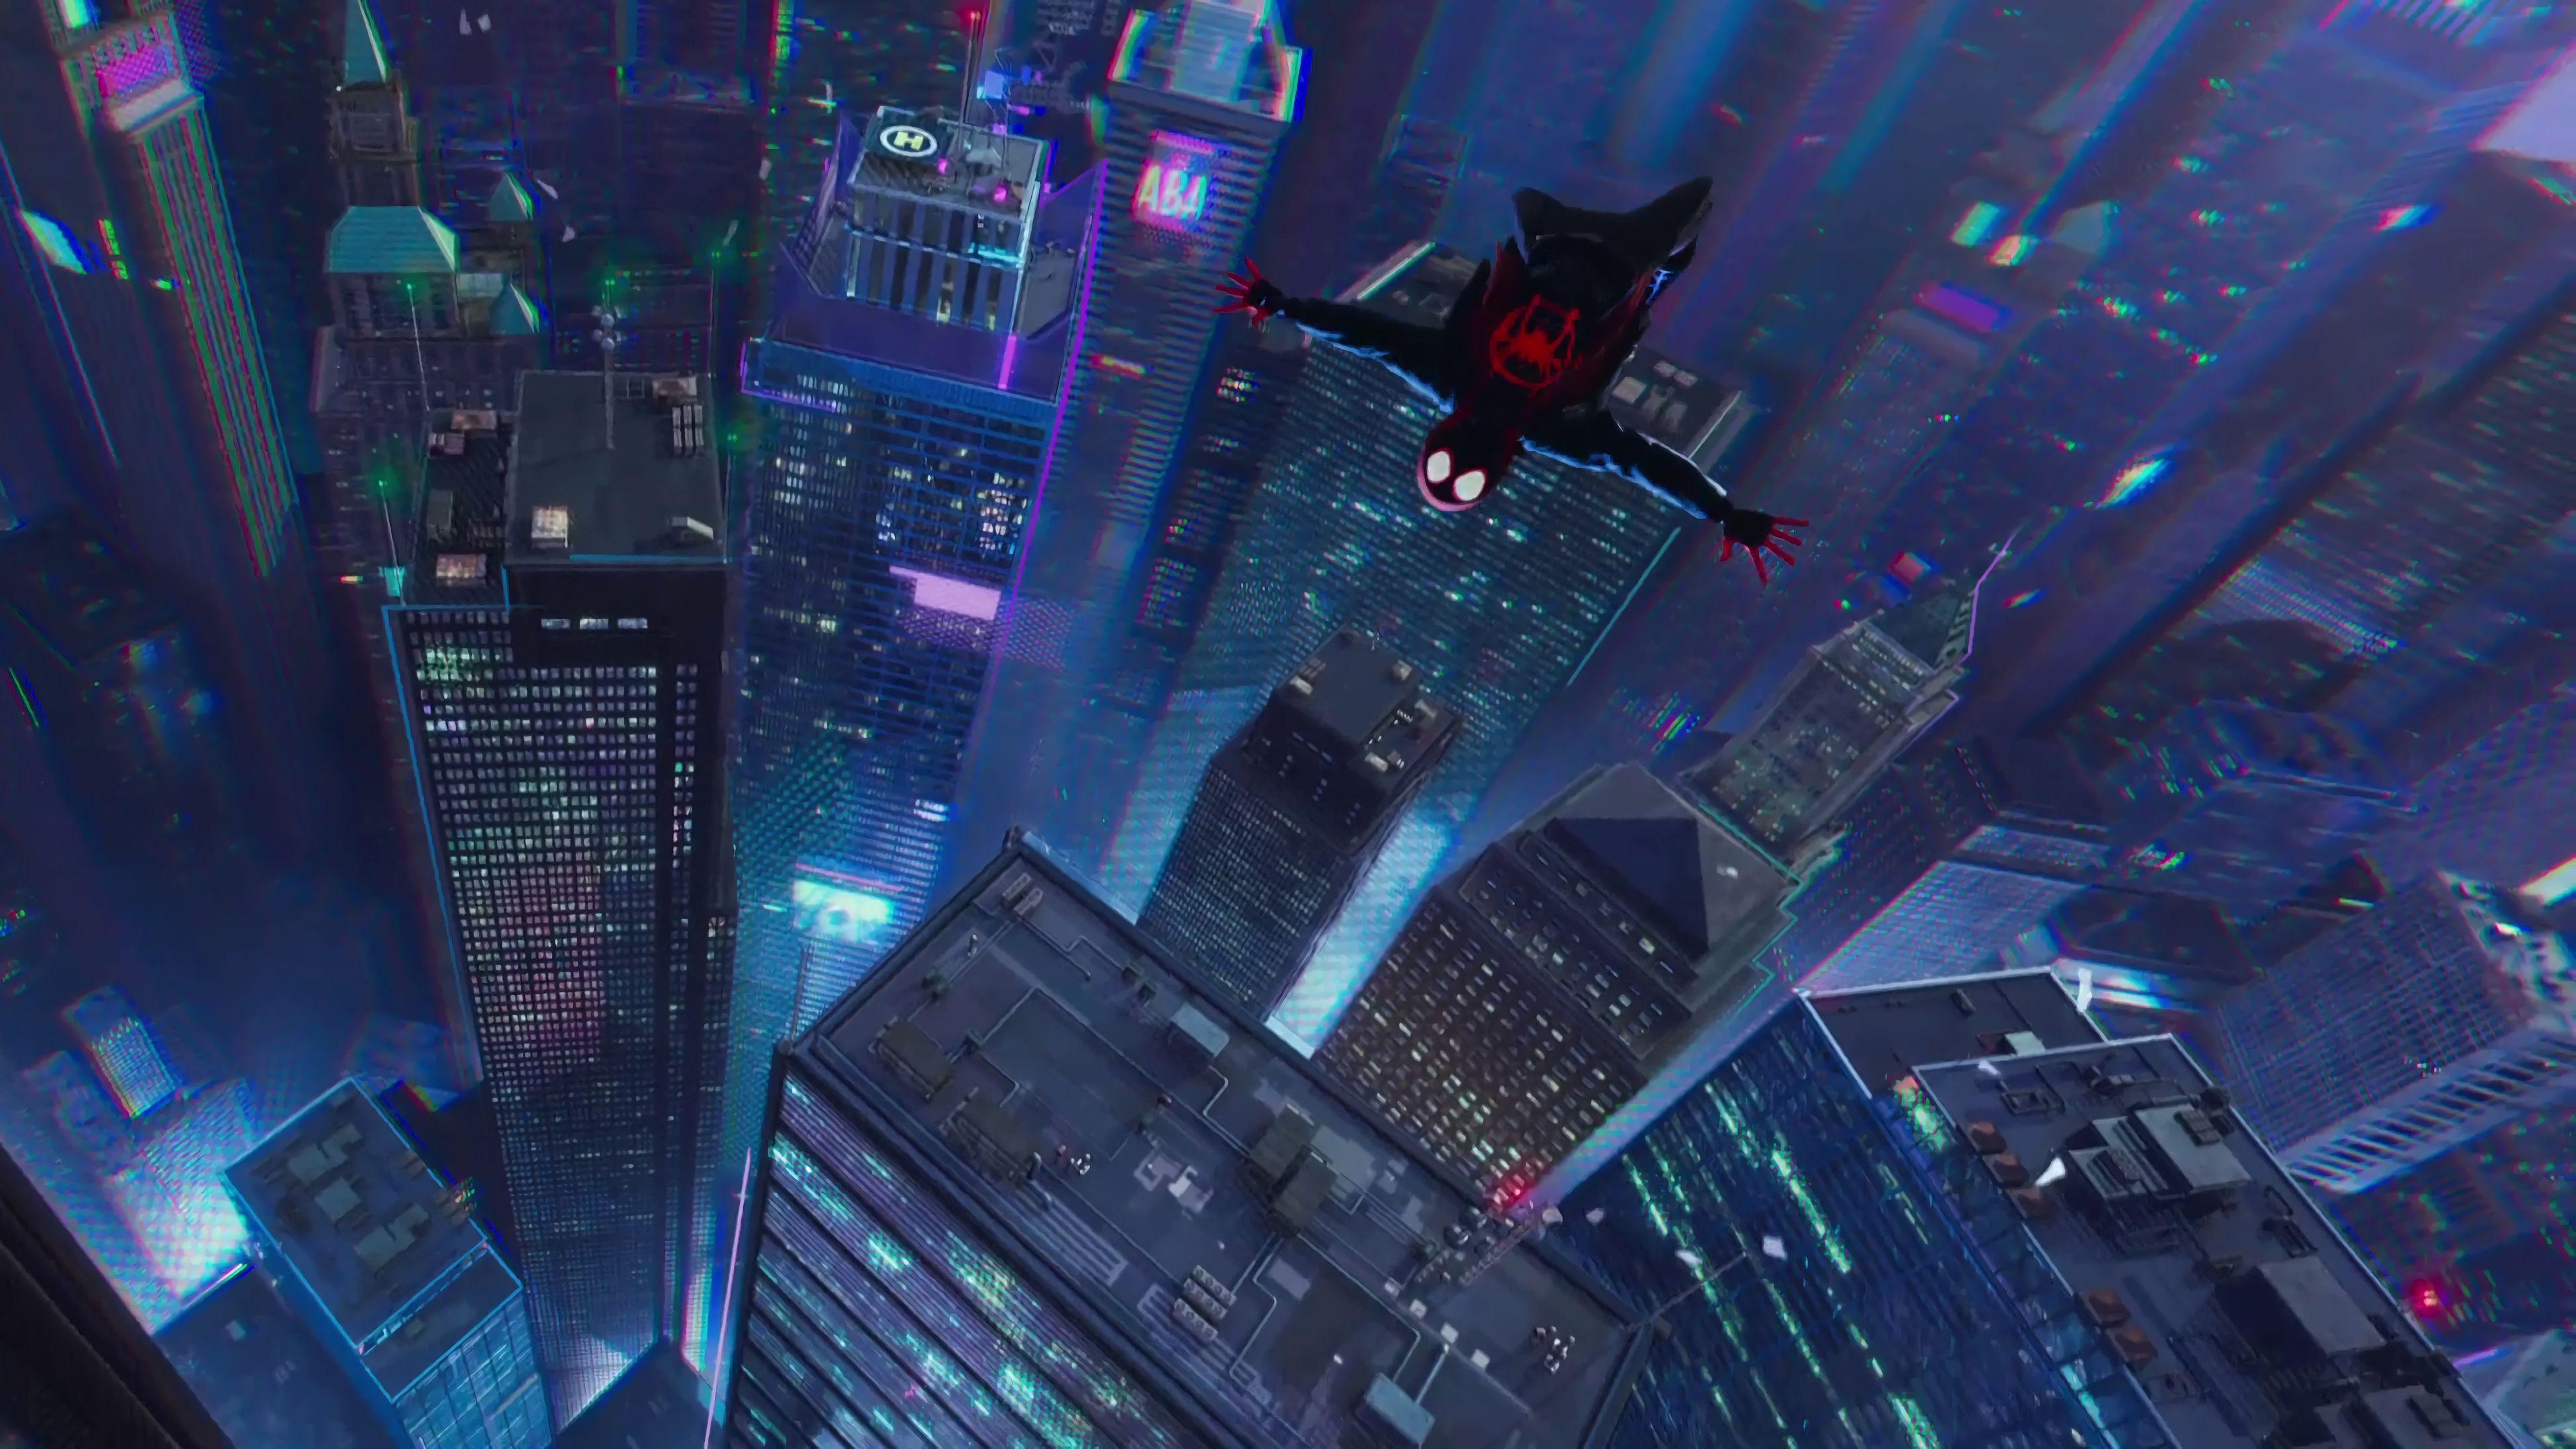 430 SpiderMan Into The SpiderVerse HD Wallpapers and Backgrounds